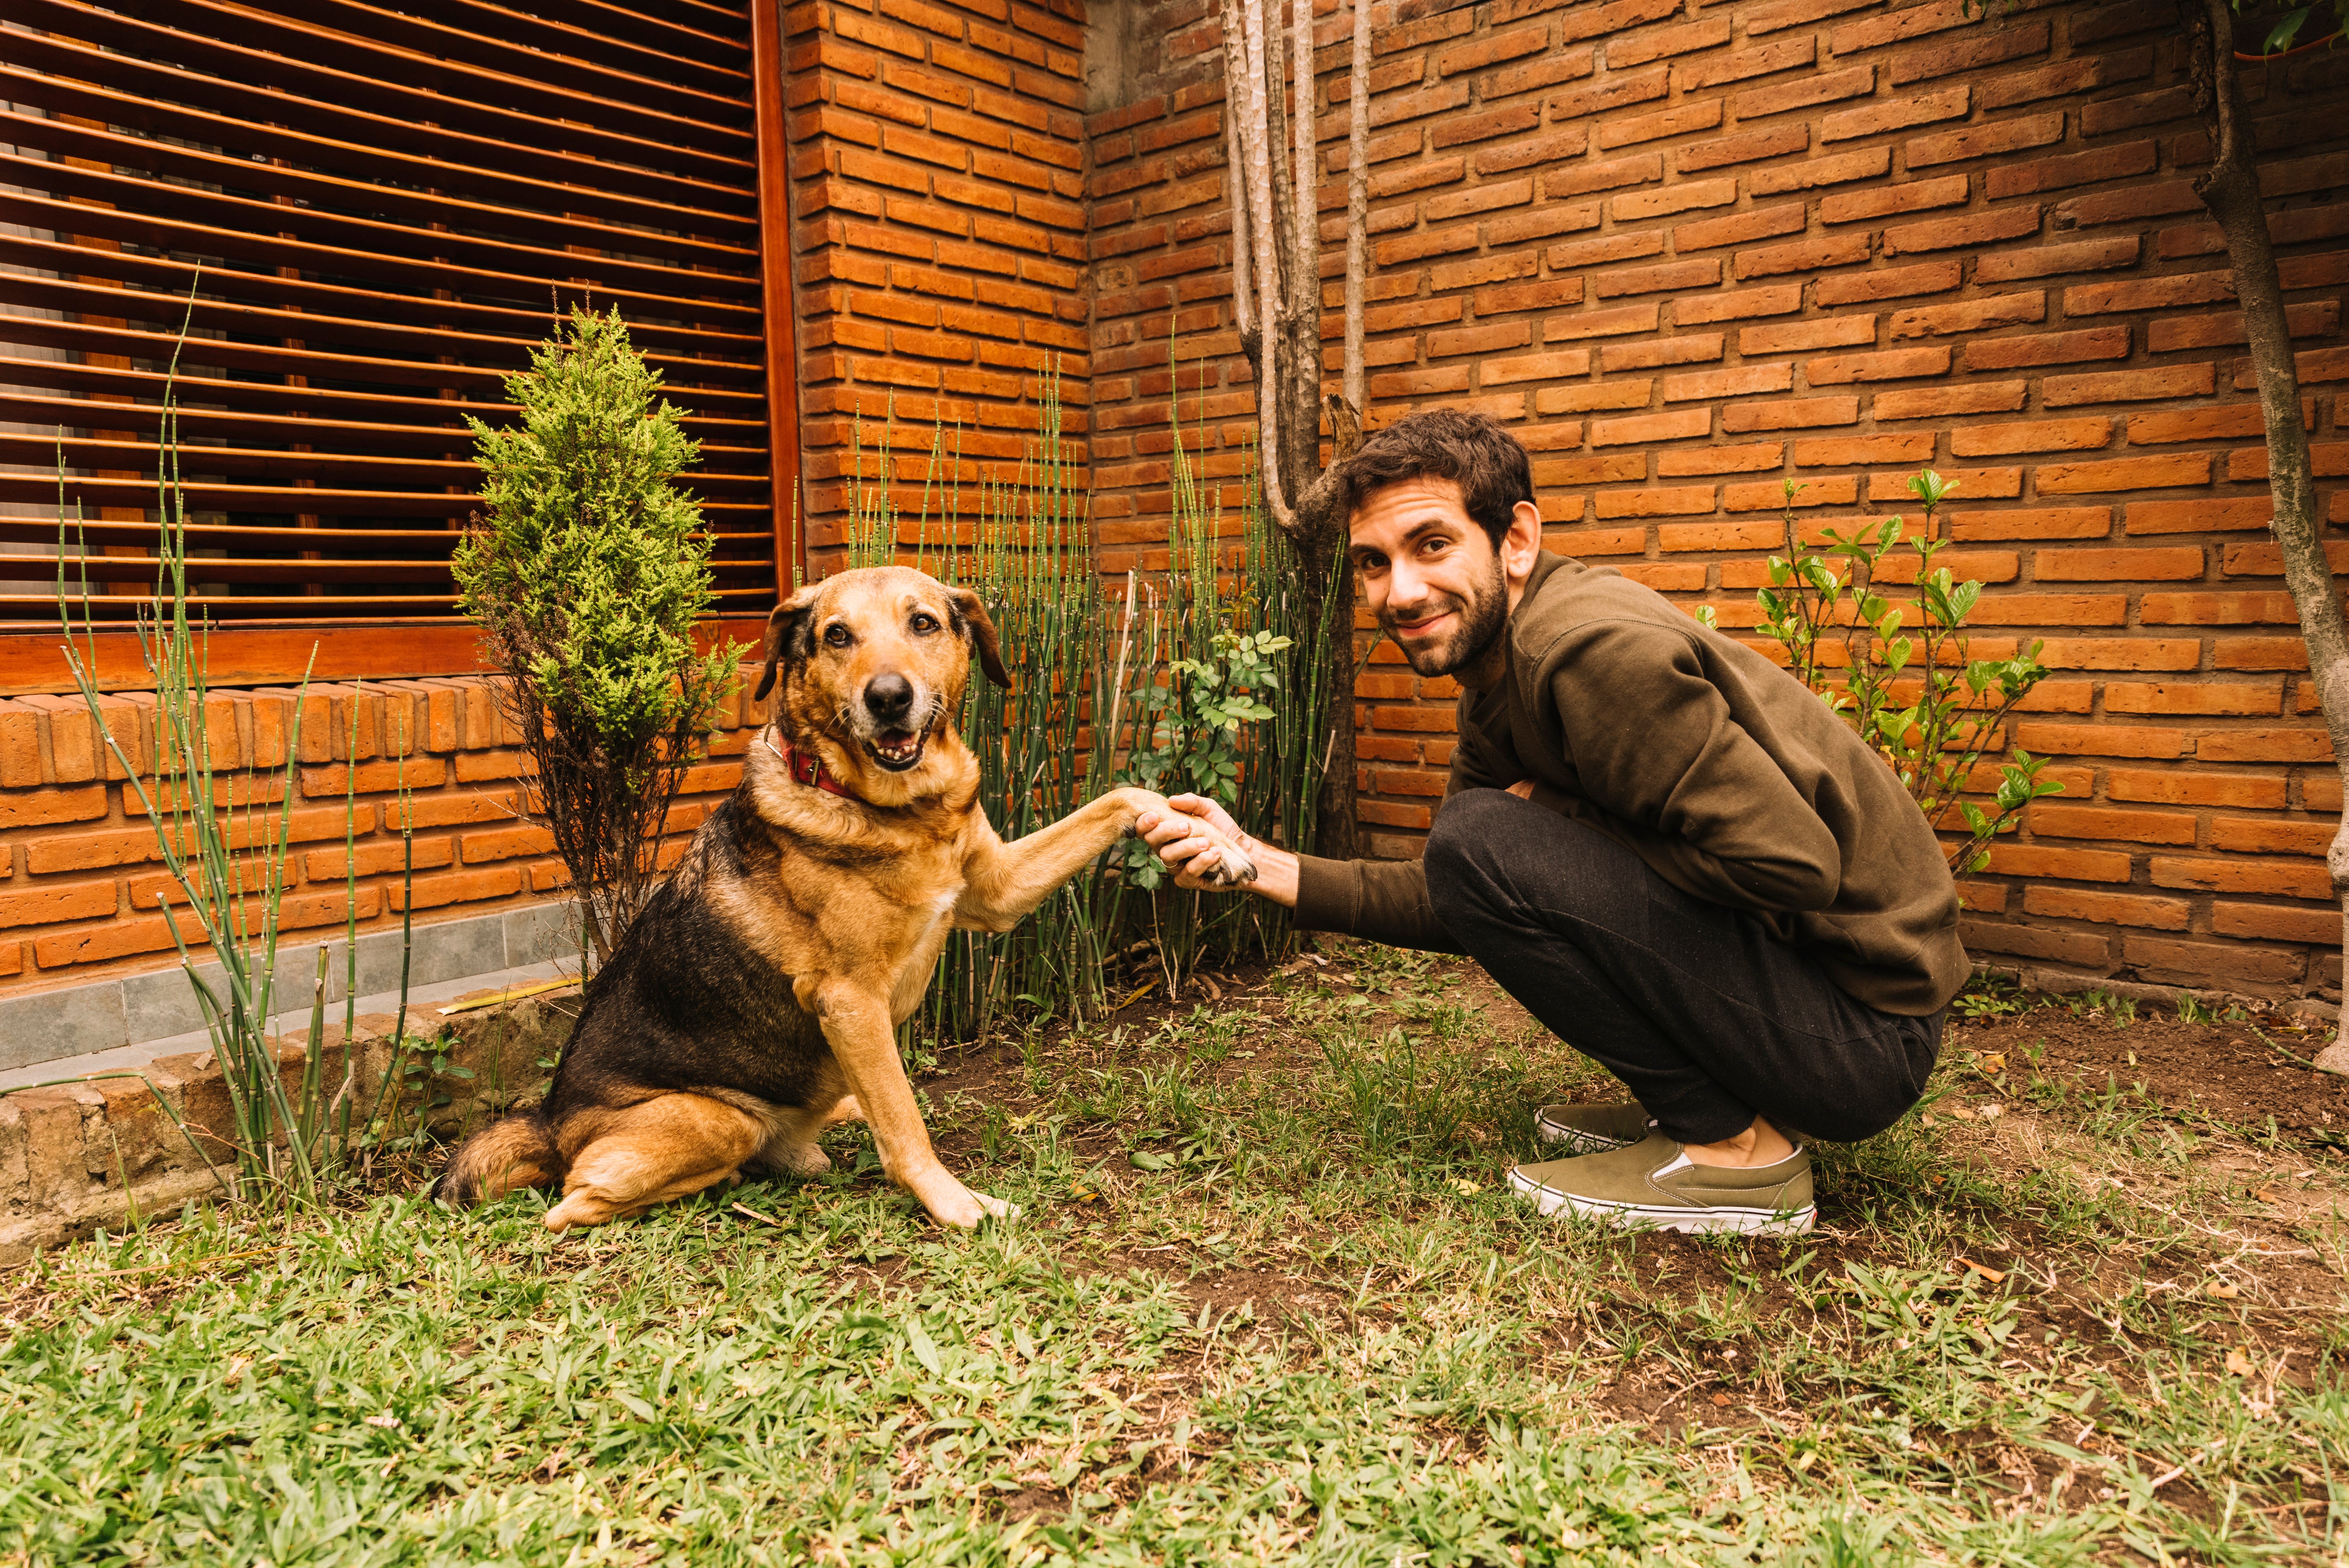 Dog posing in a garden with a human